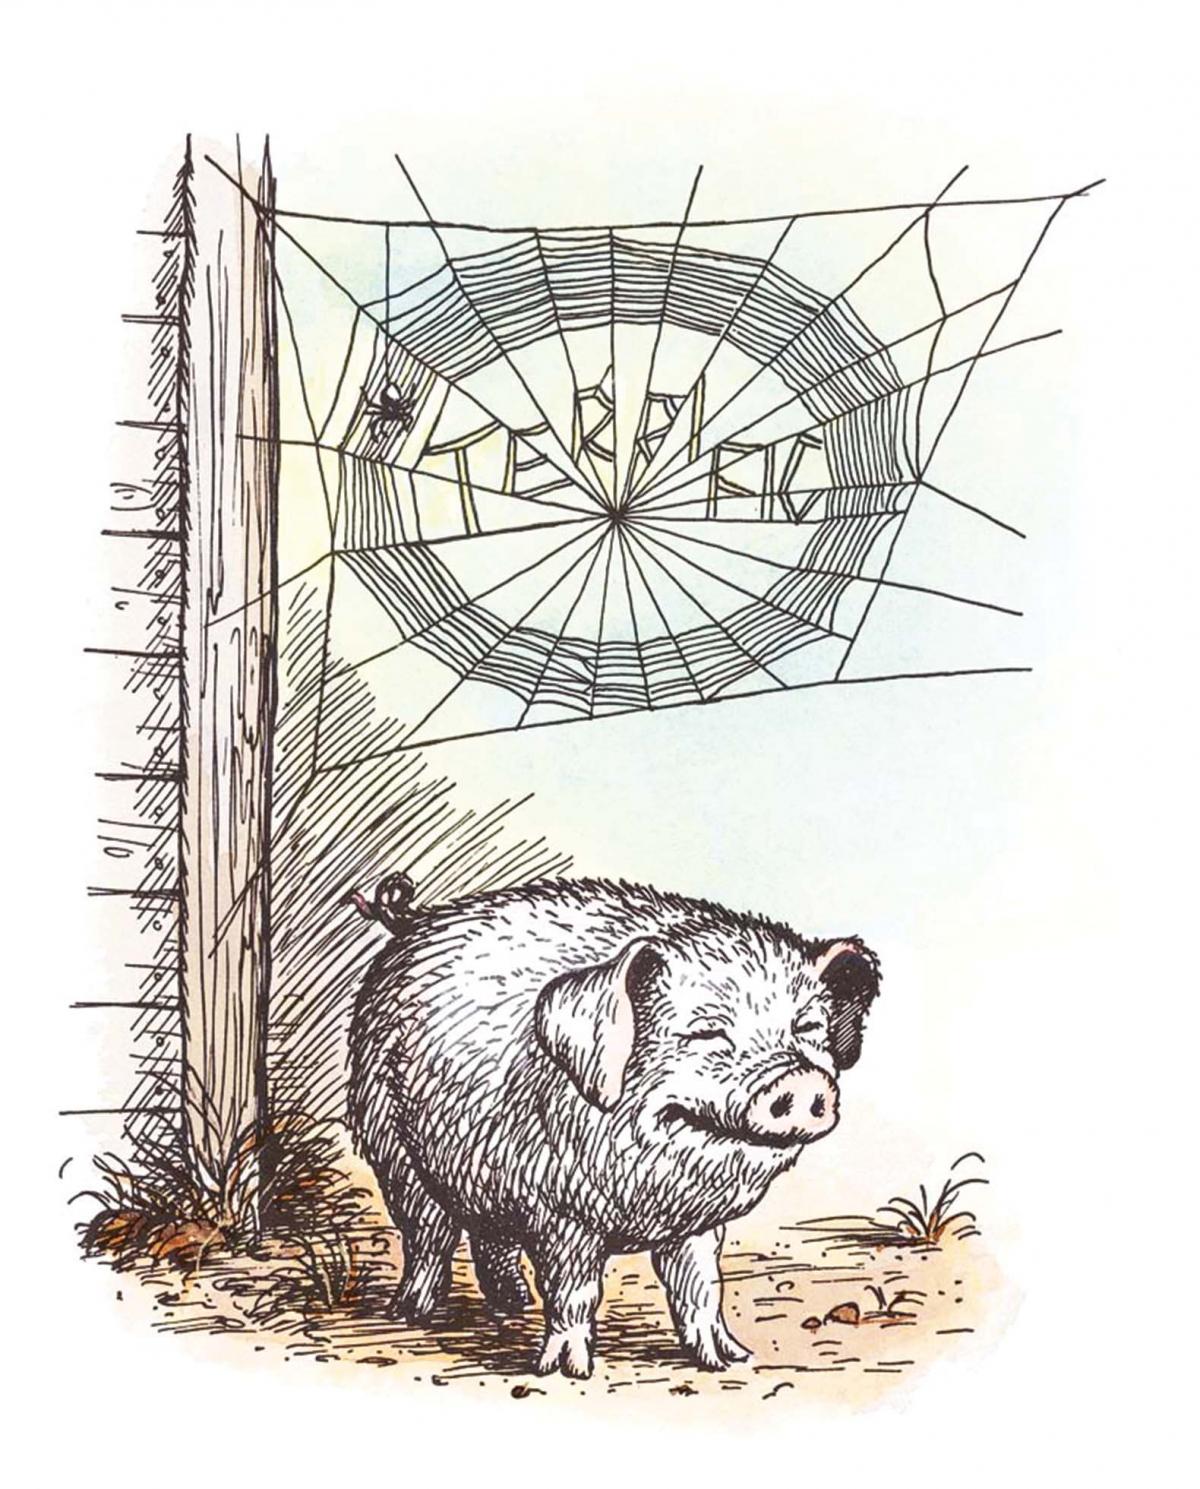 Wilbur the pig, standing and smiling underneath the spider's web which spells out "terrific"